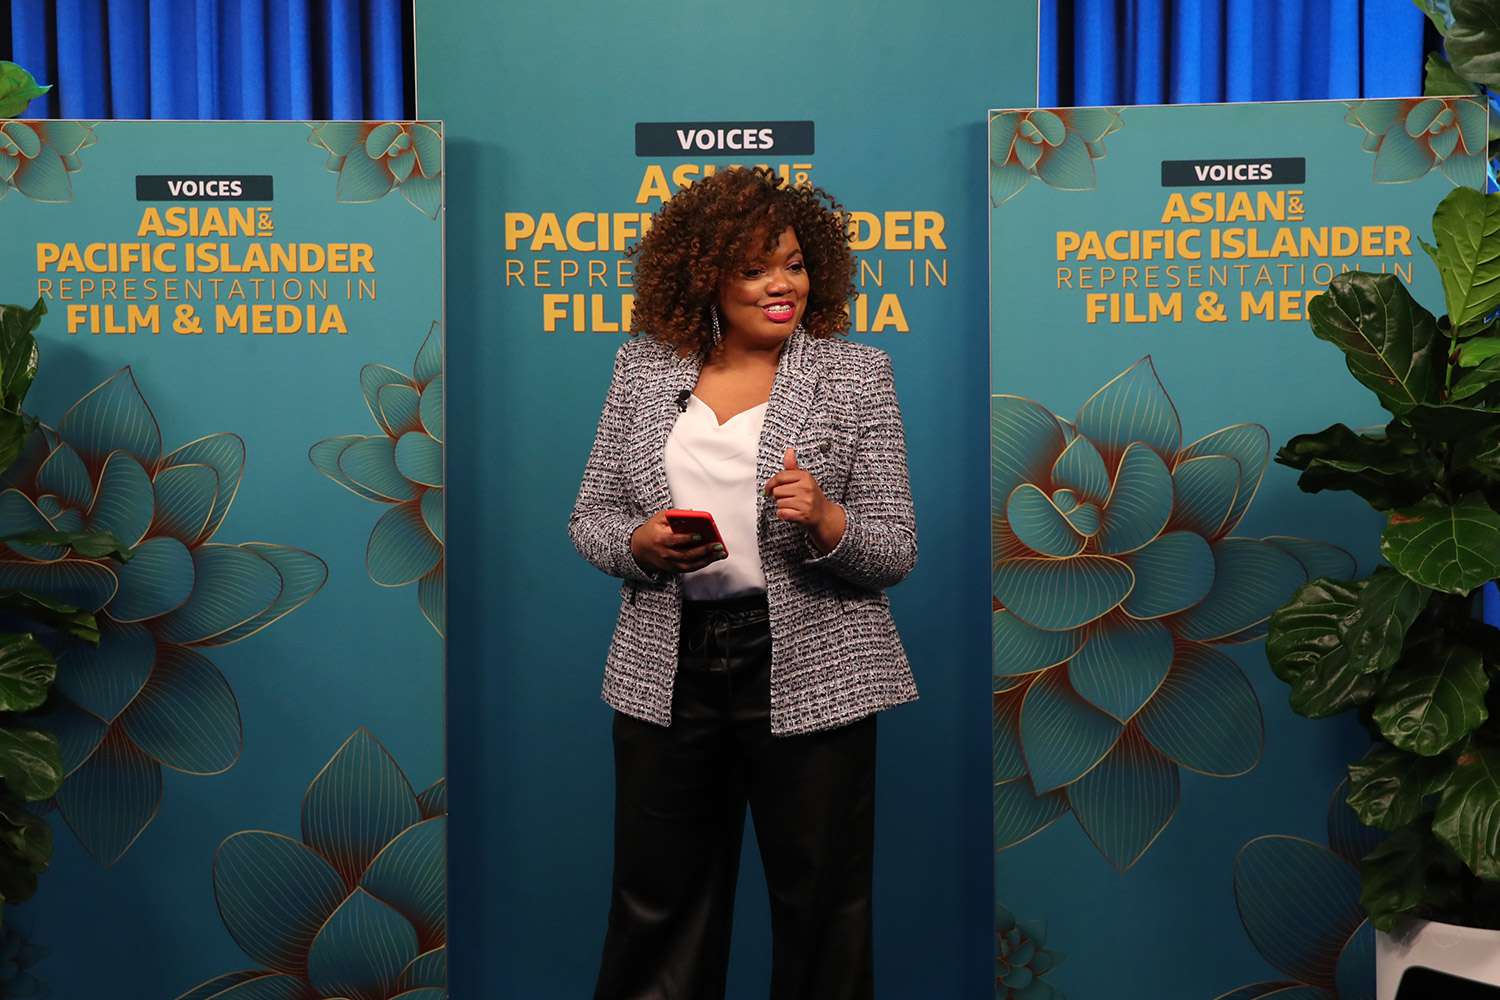 Latasha Gillespie at the VOICES: Asian + Pacific Islander Representation in Film + Media event at the Amazon Studios in Culver City, California, on May 19, 2022 (Photo by Jonathan Leibson/Amazon/Shutterstock)